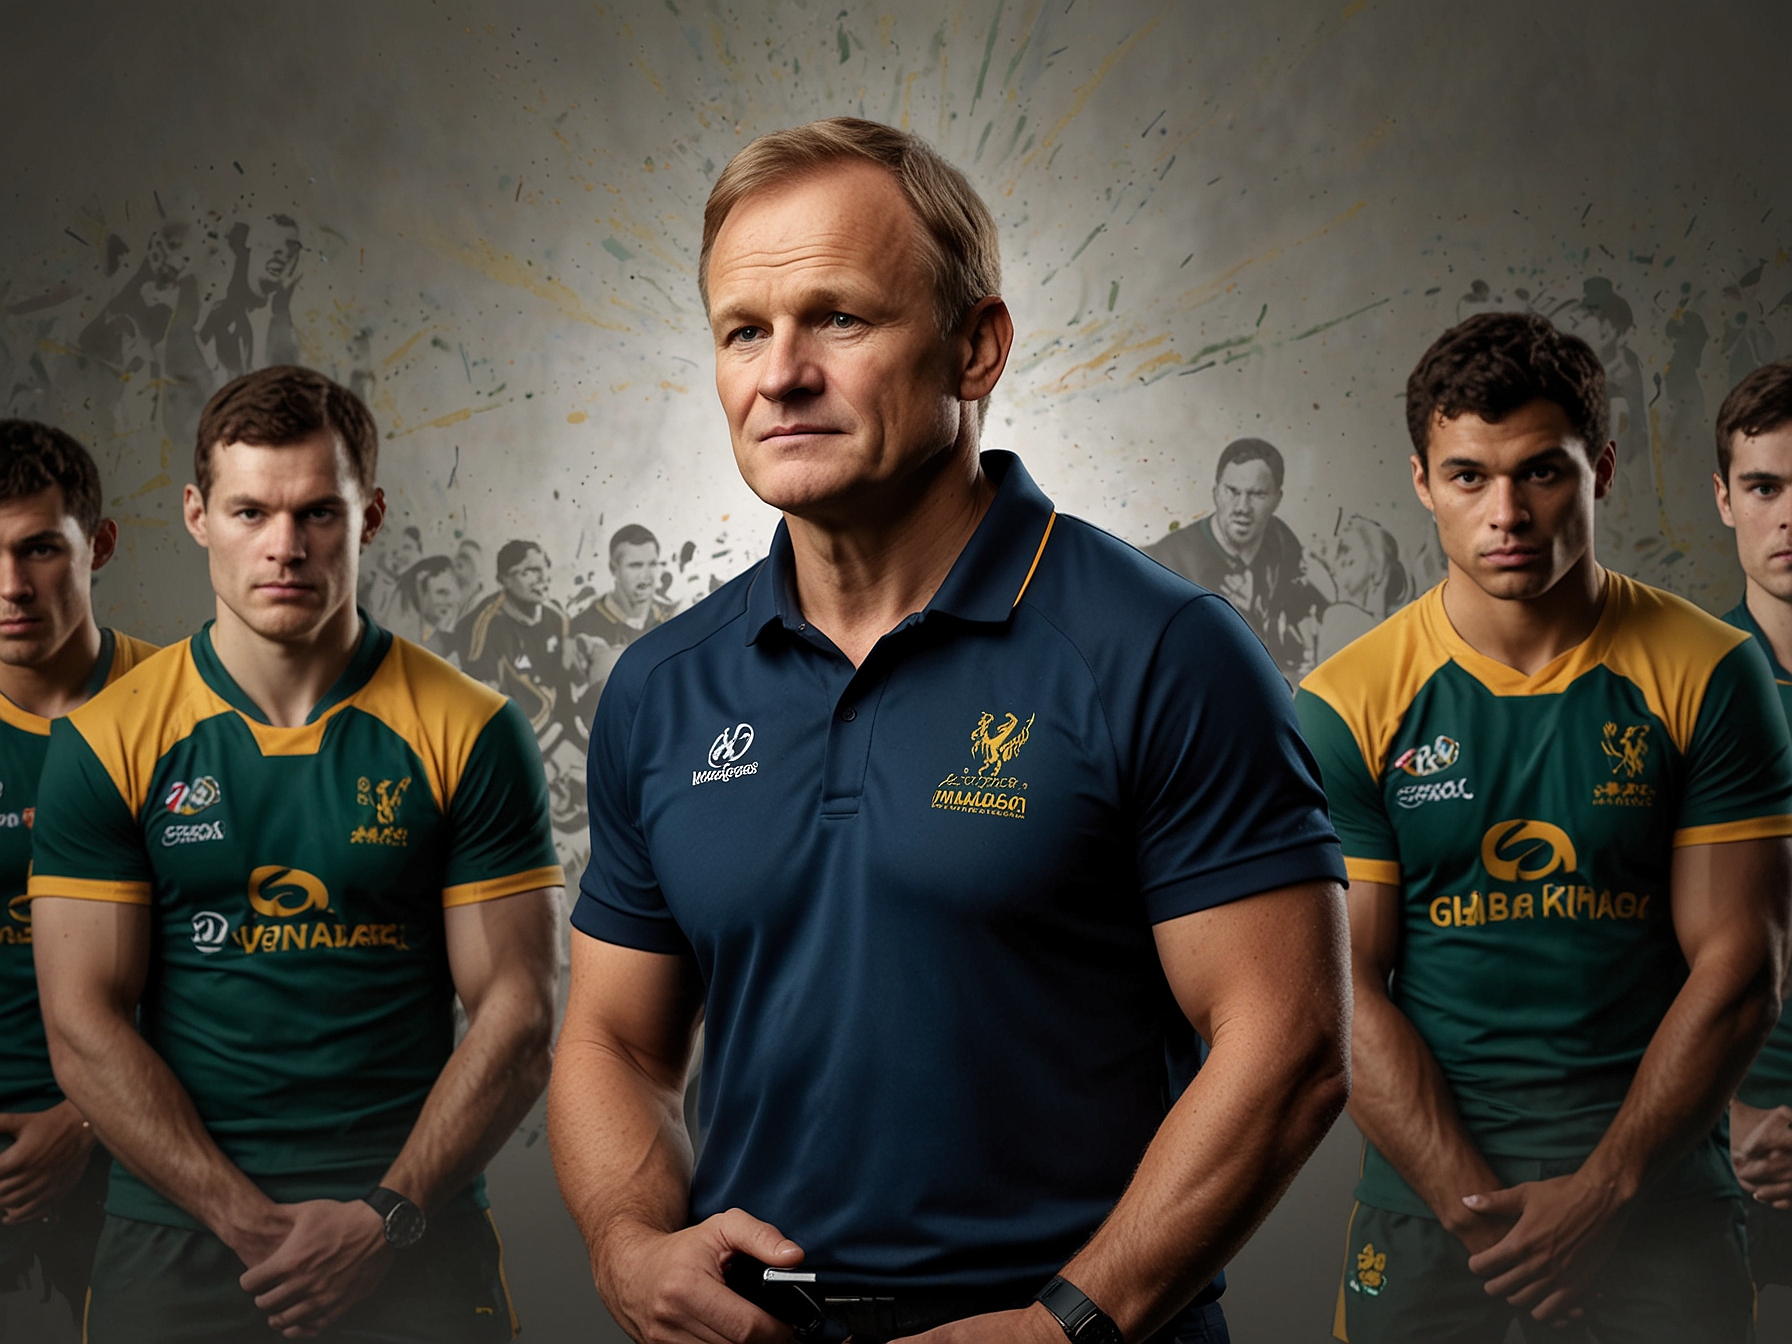 Joe Schmidt, the Wallabies head coach, addressing the media as he reveals his first national squad, featuring a mix of experienced players like Kurtley Beale and 13 new talents.